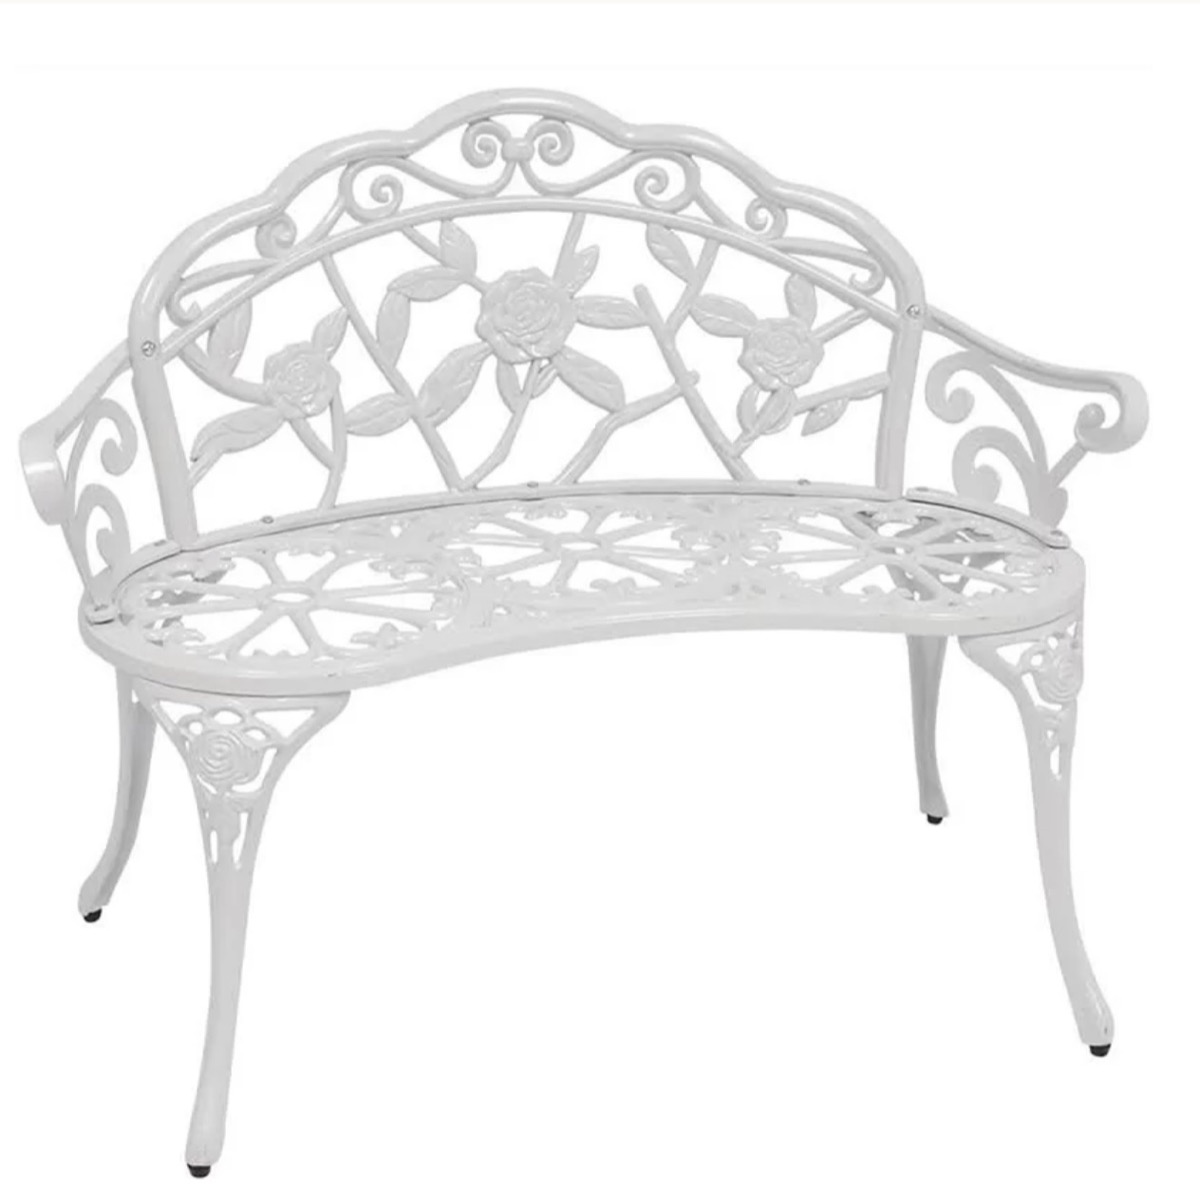 white cast iron bench, old fashioned home items